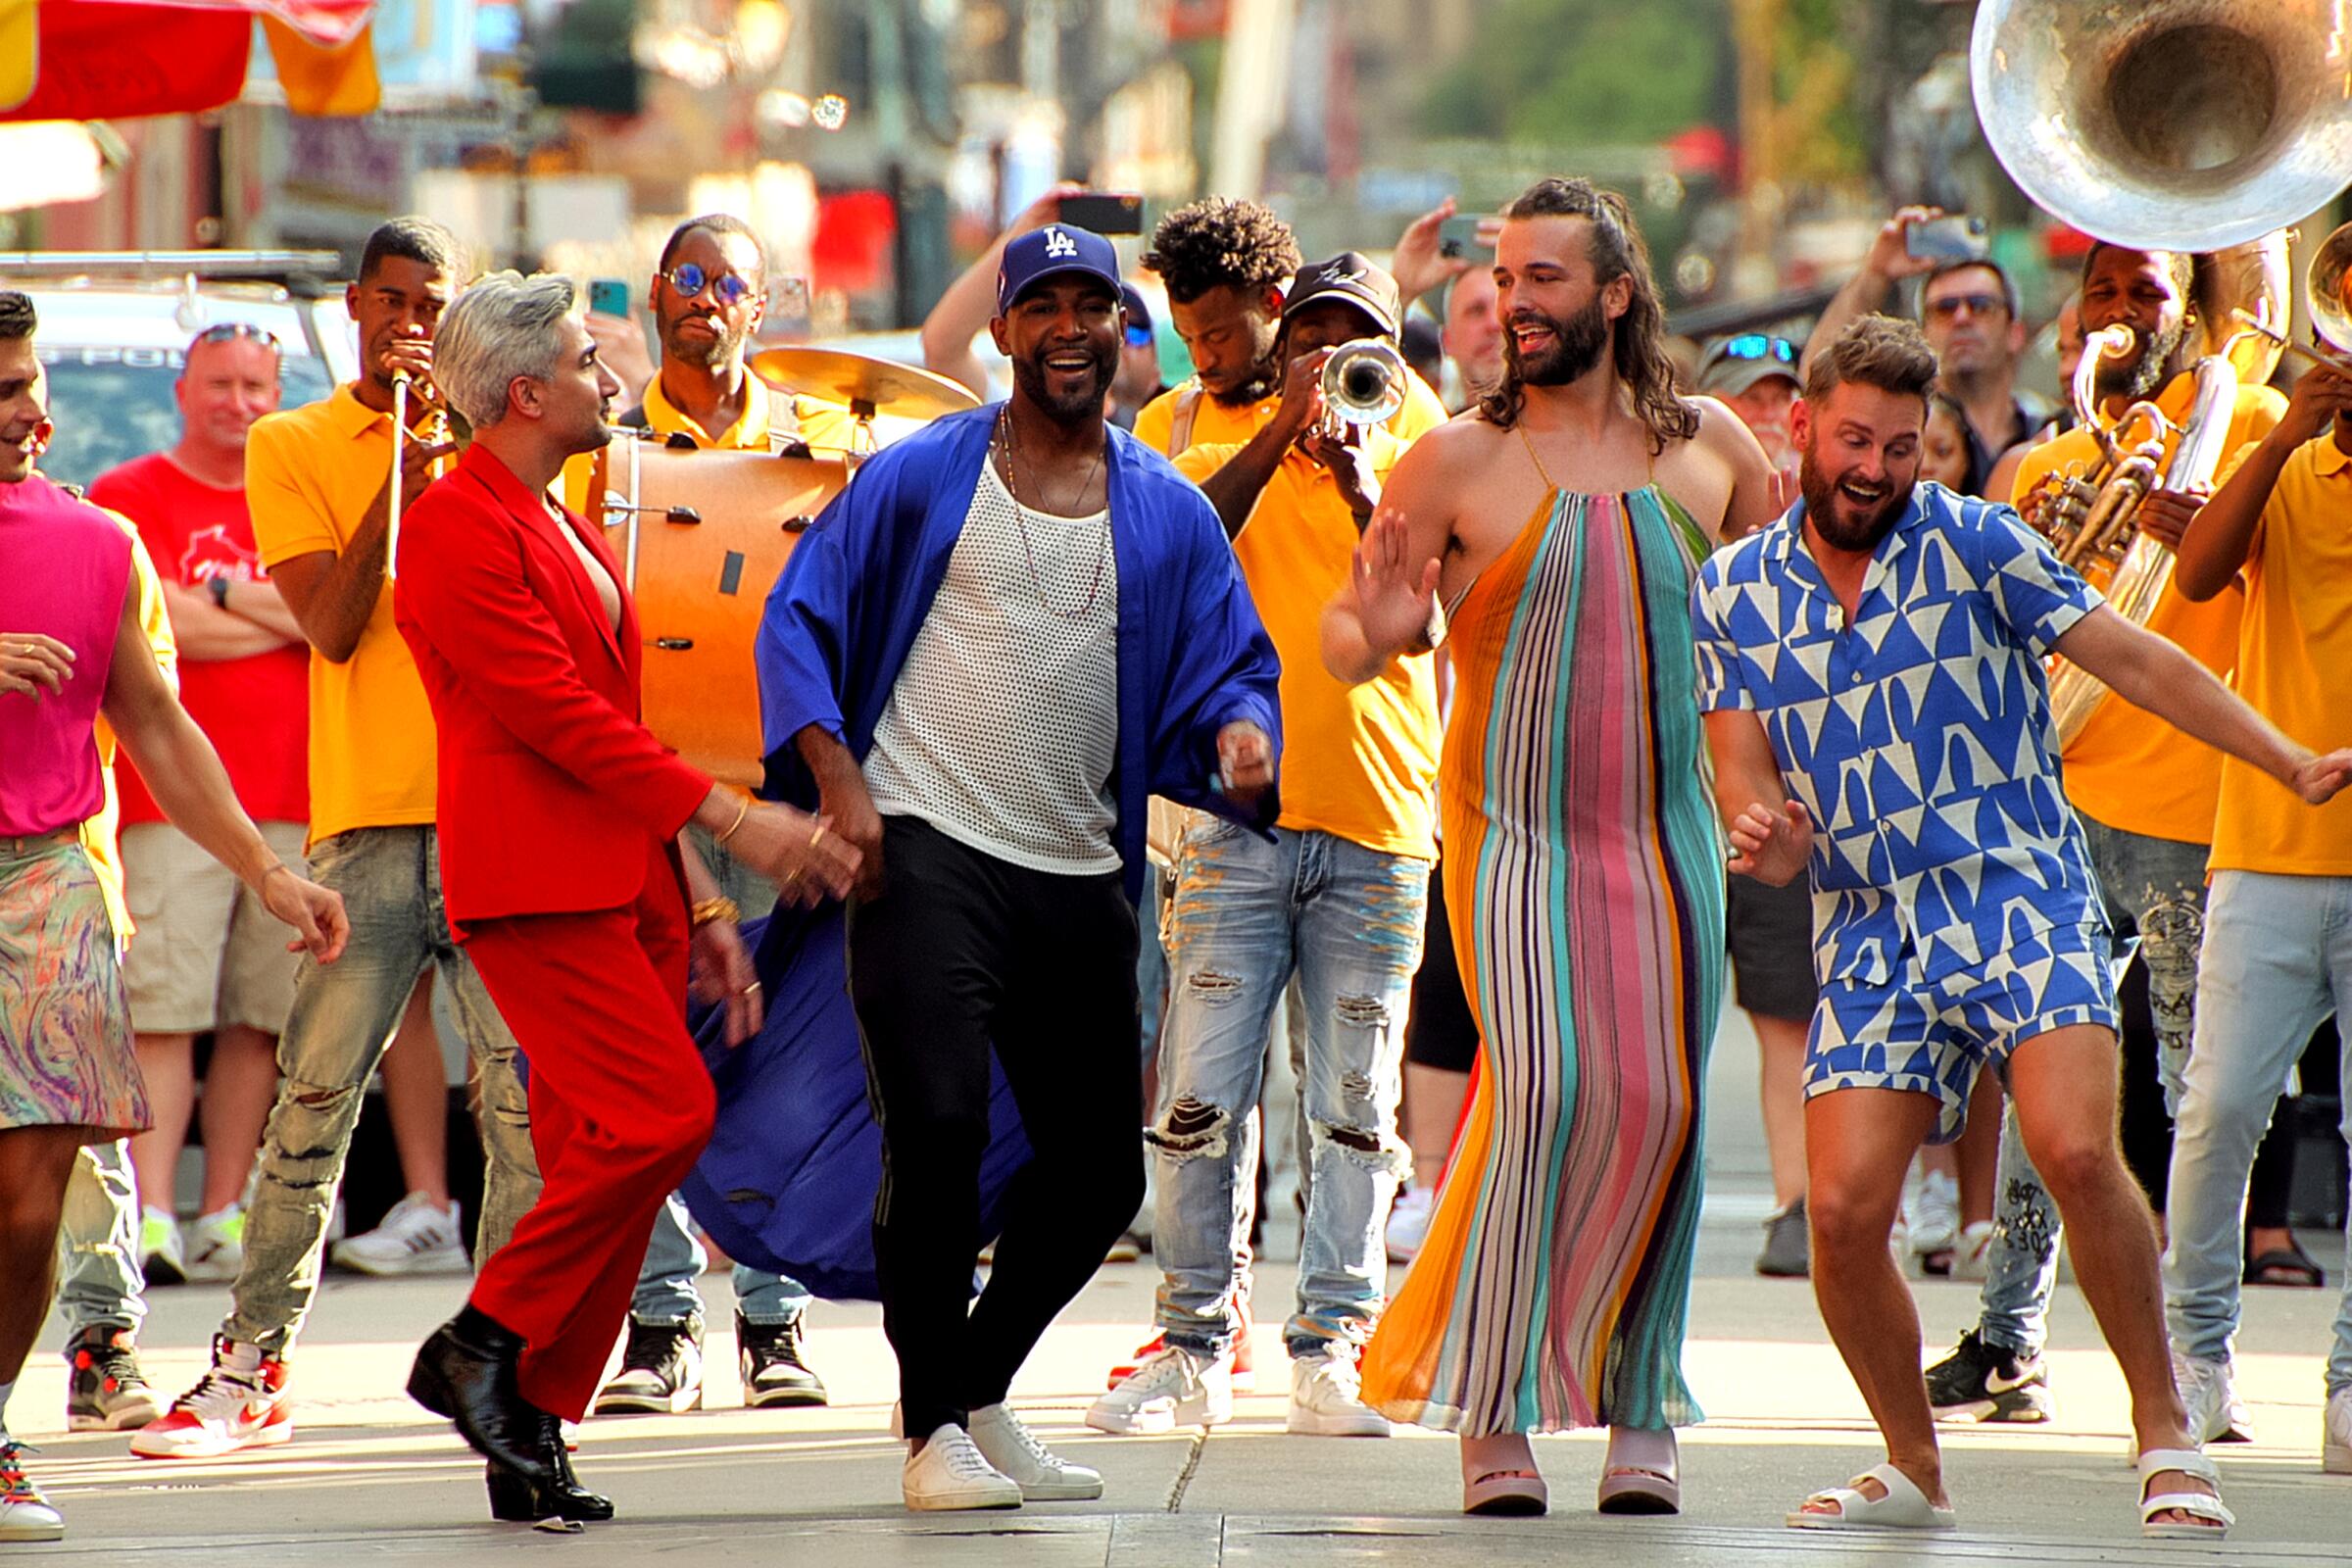 "Queer Eye's" Fab Five dance in the street ahead of a brass band in New Orleans.